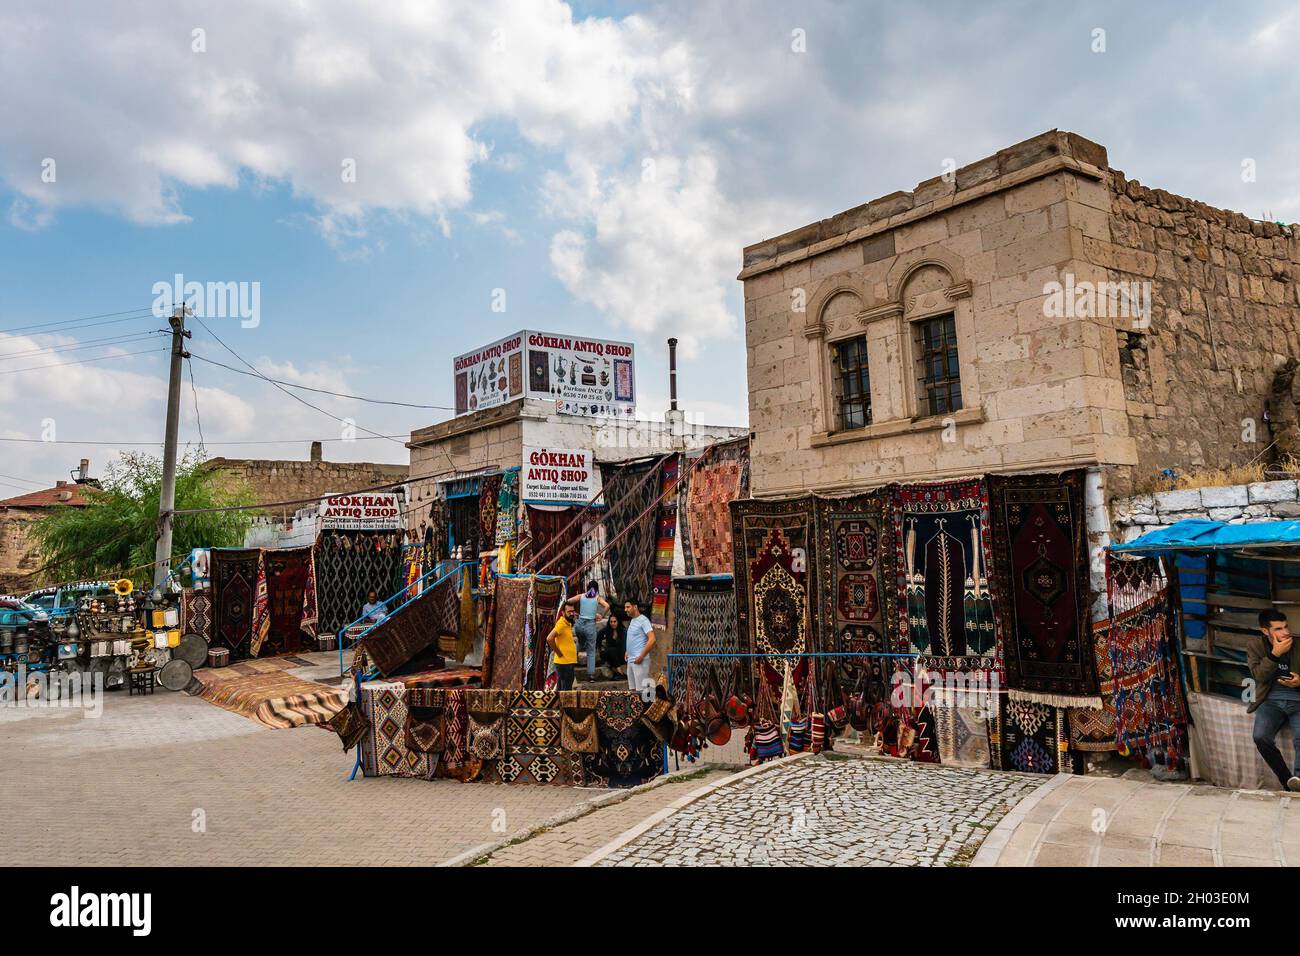 Derinkuyu Underground City Breathtaking Picturesque View of Souvenir Shops Selling Carpet on a Blue Sky Day in Summer Stock Photo